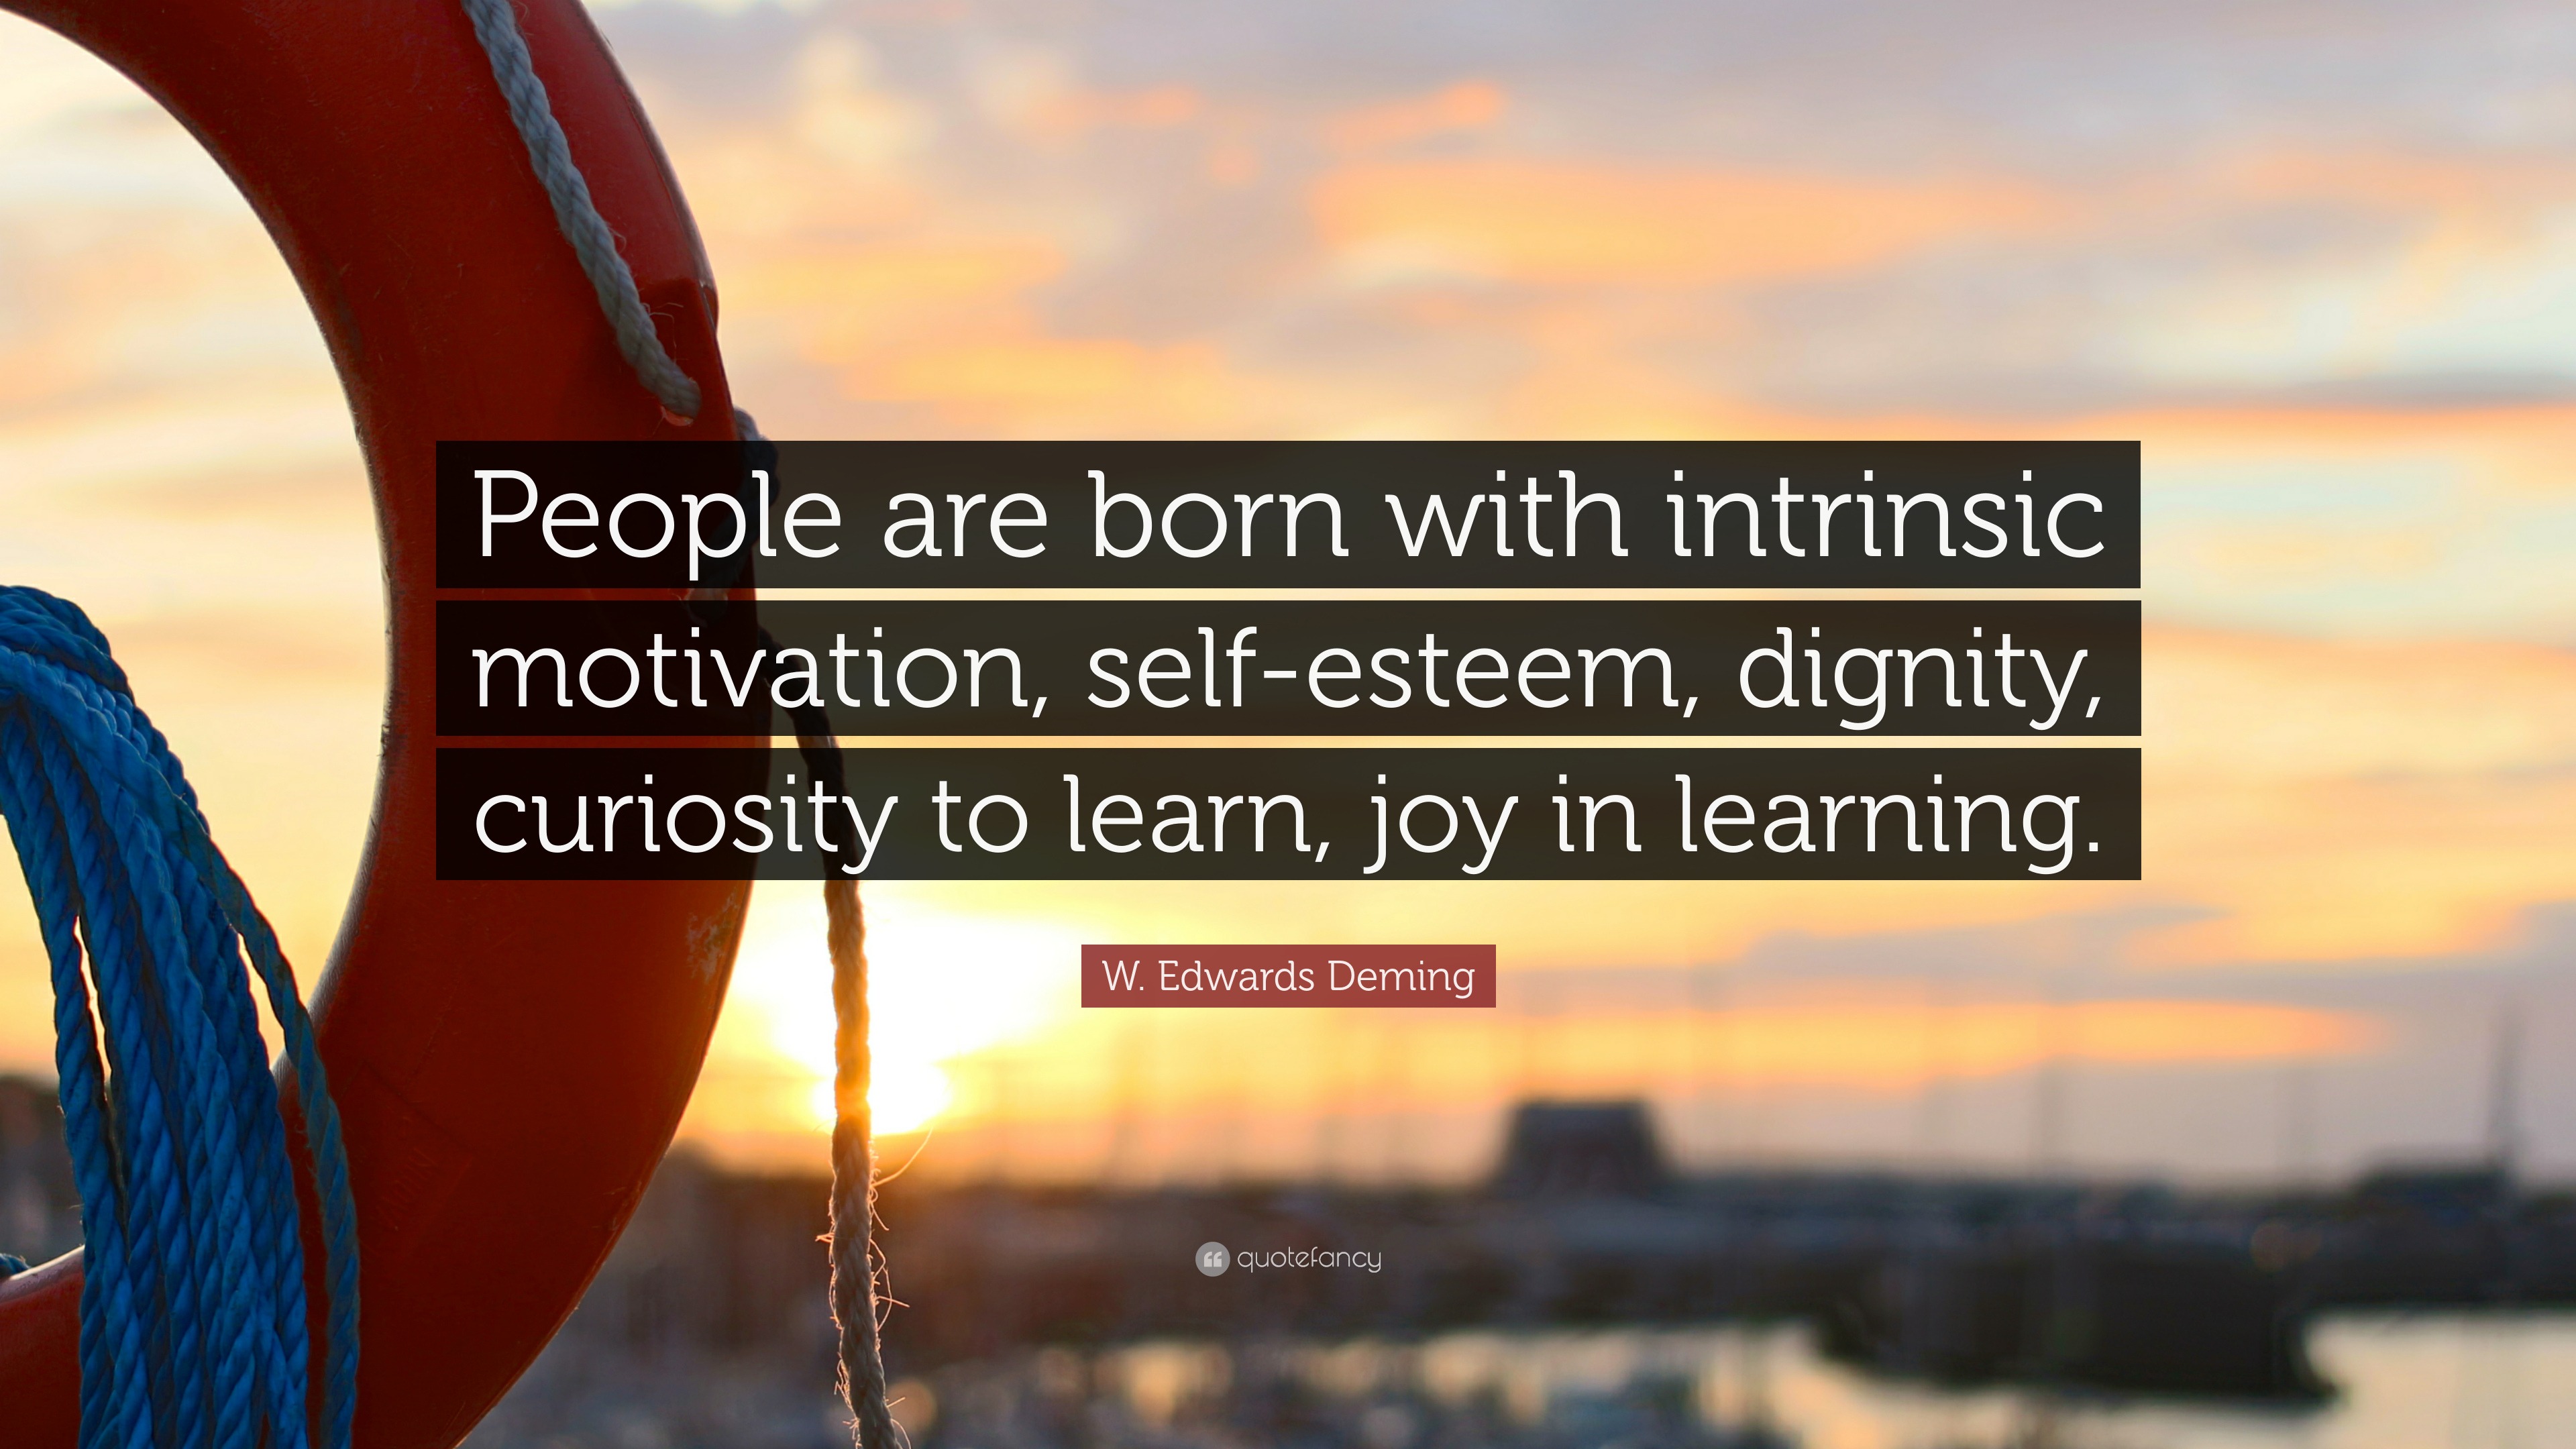 W. Edwards Deming Quote: “People are born with intrinsic motivation